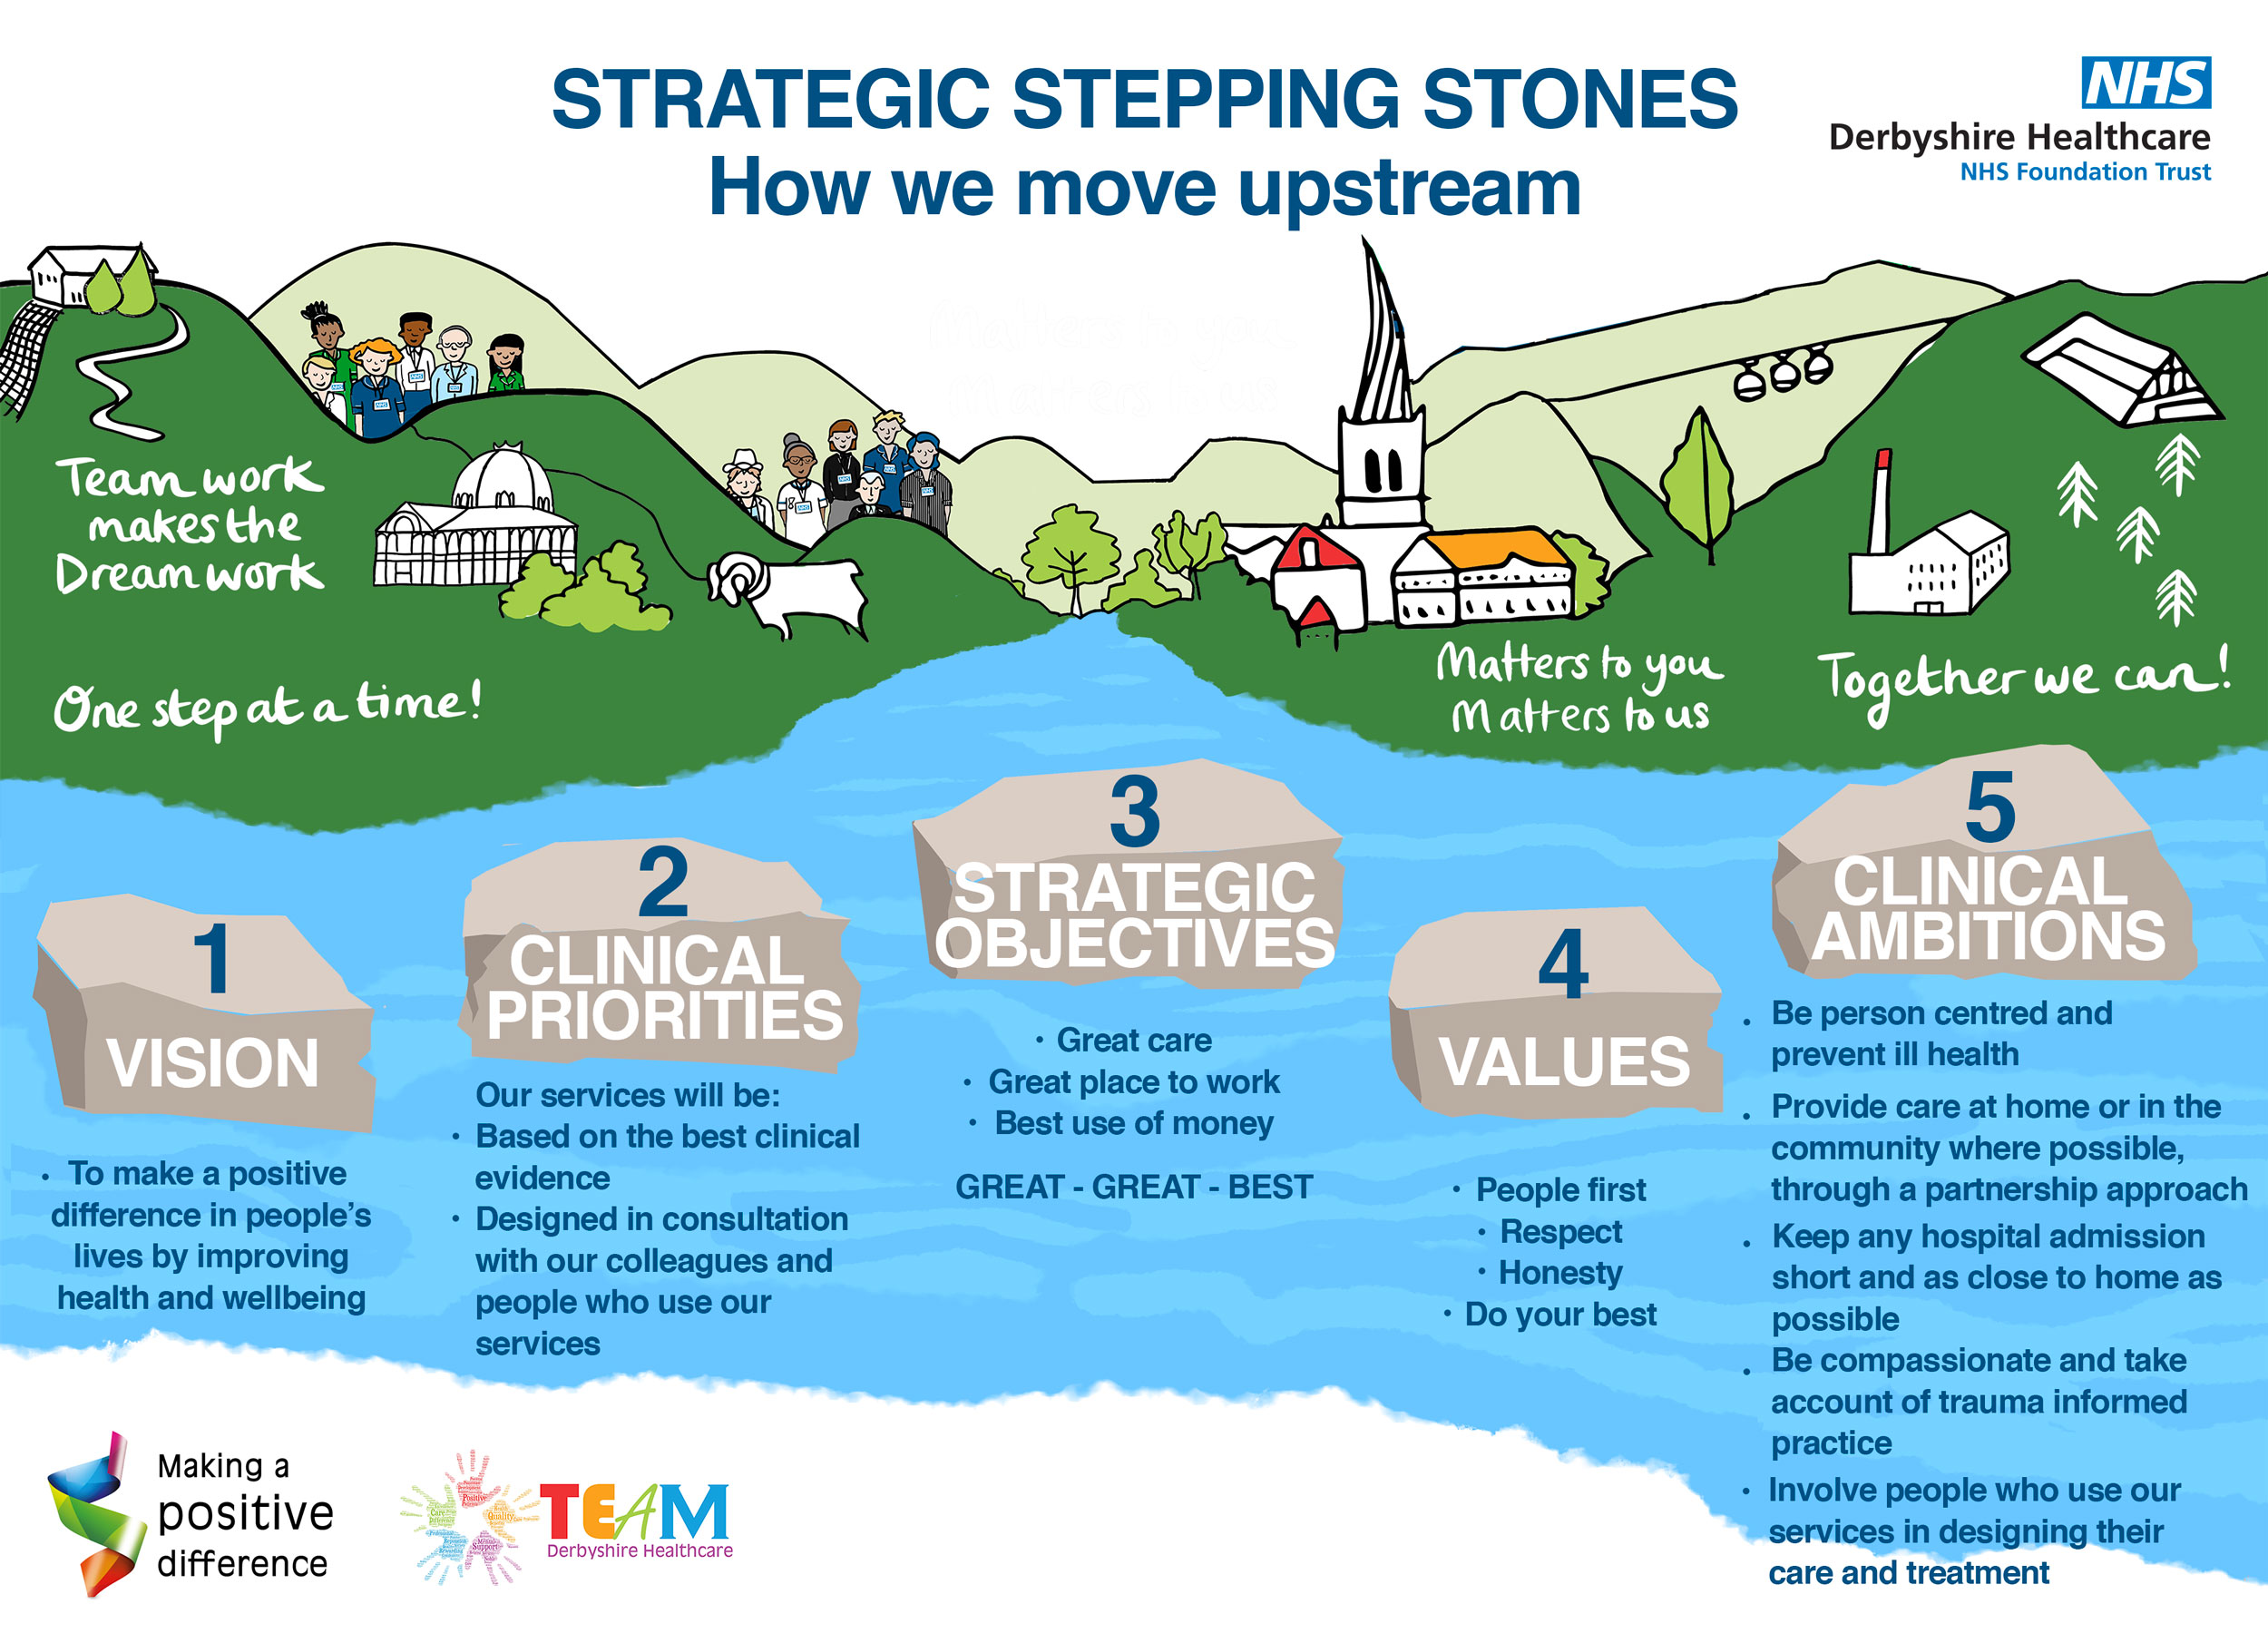 Our strategic stepping stones